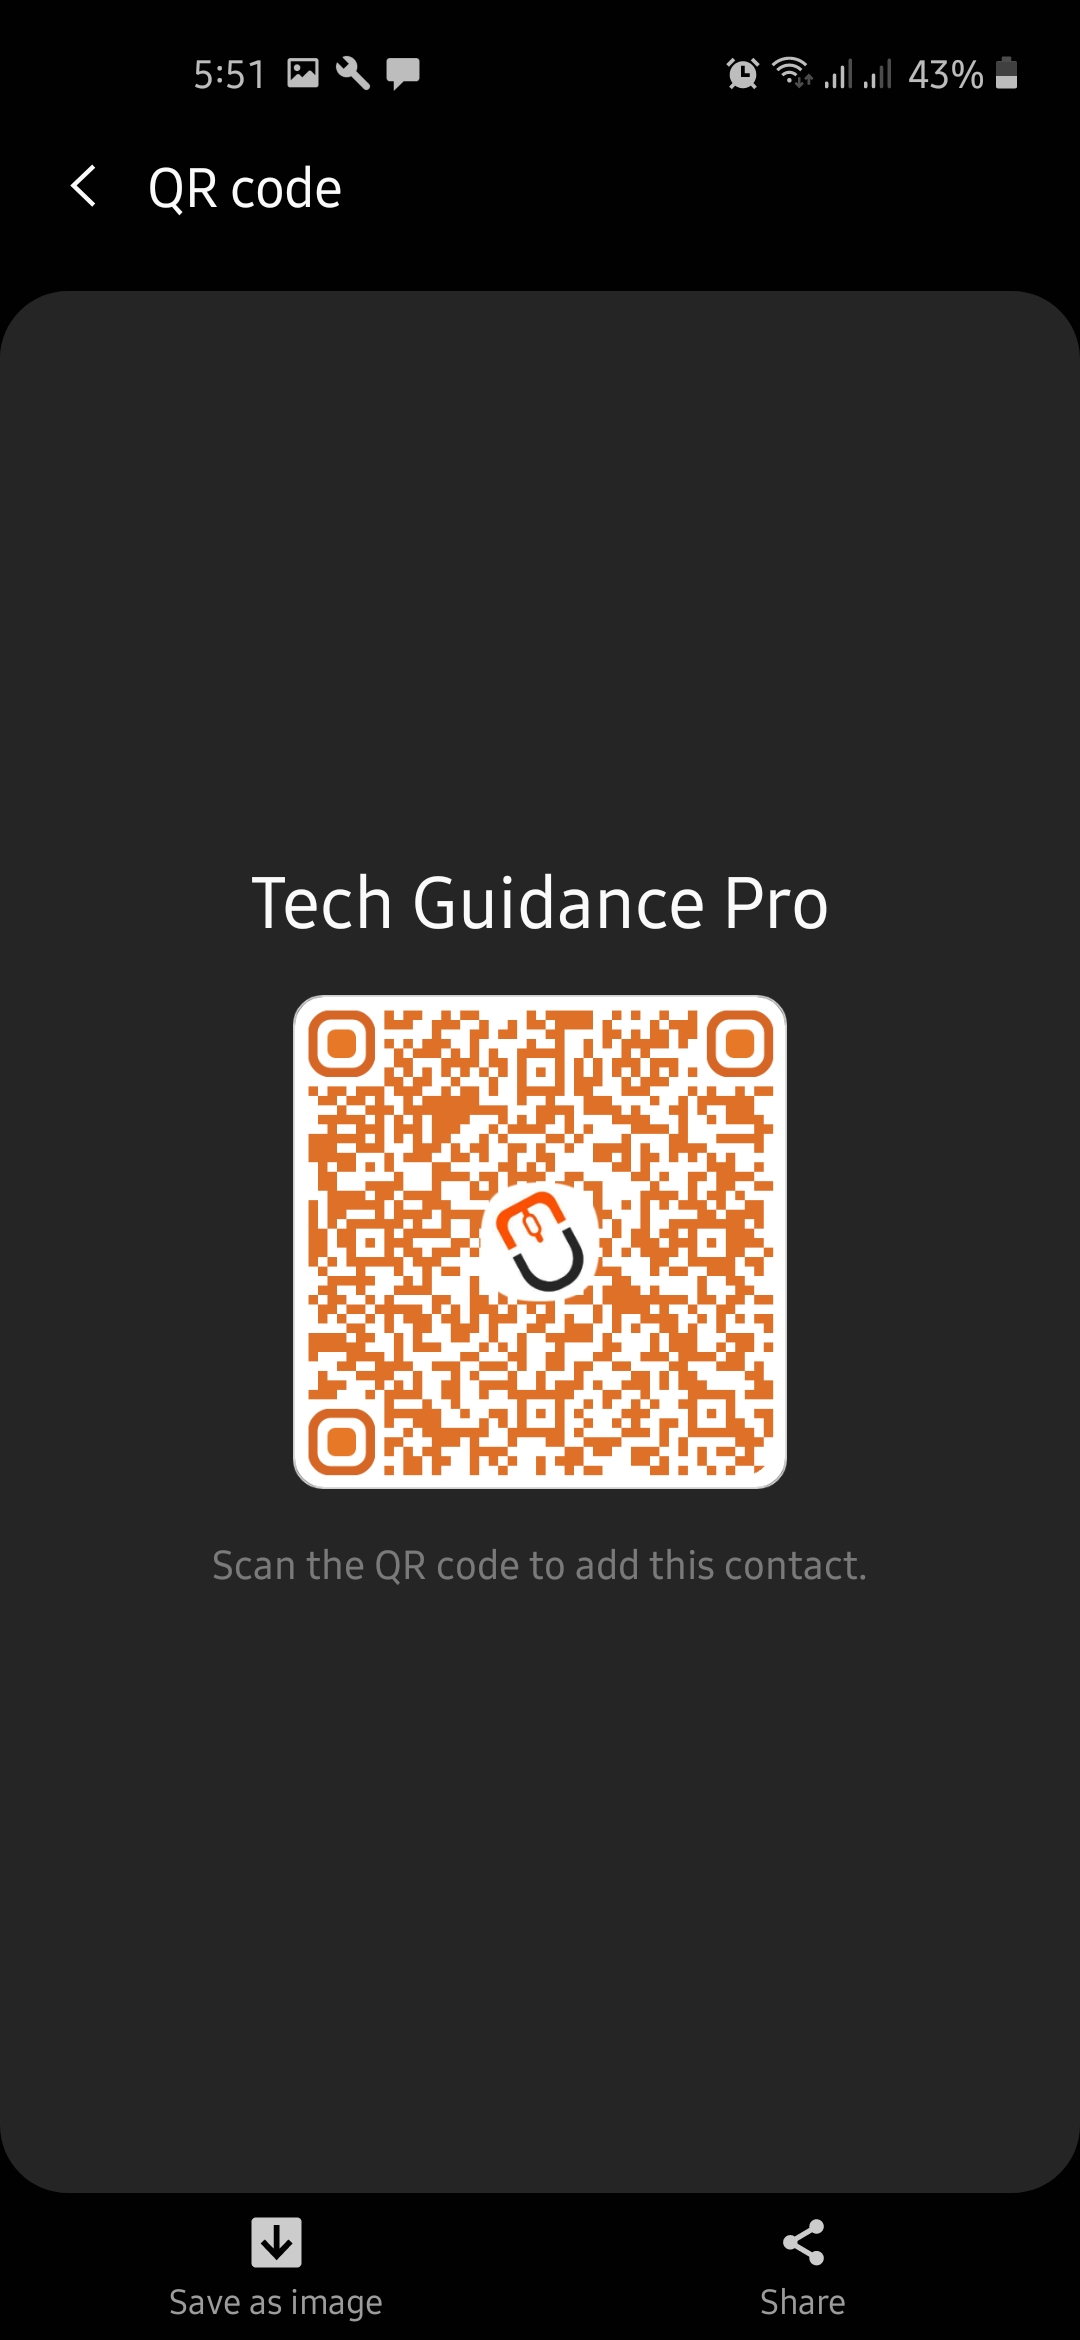 Generated contact QR code